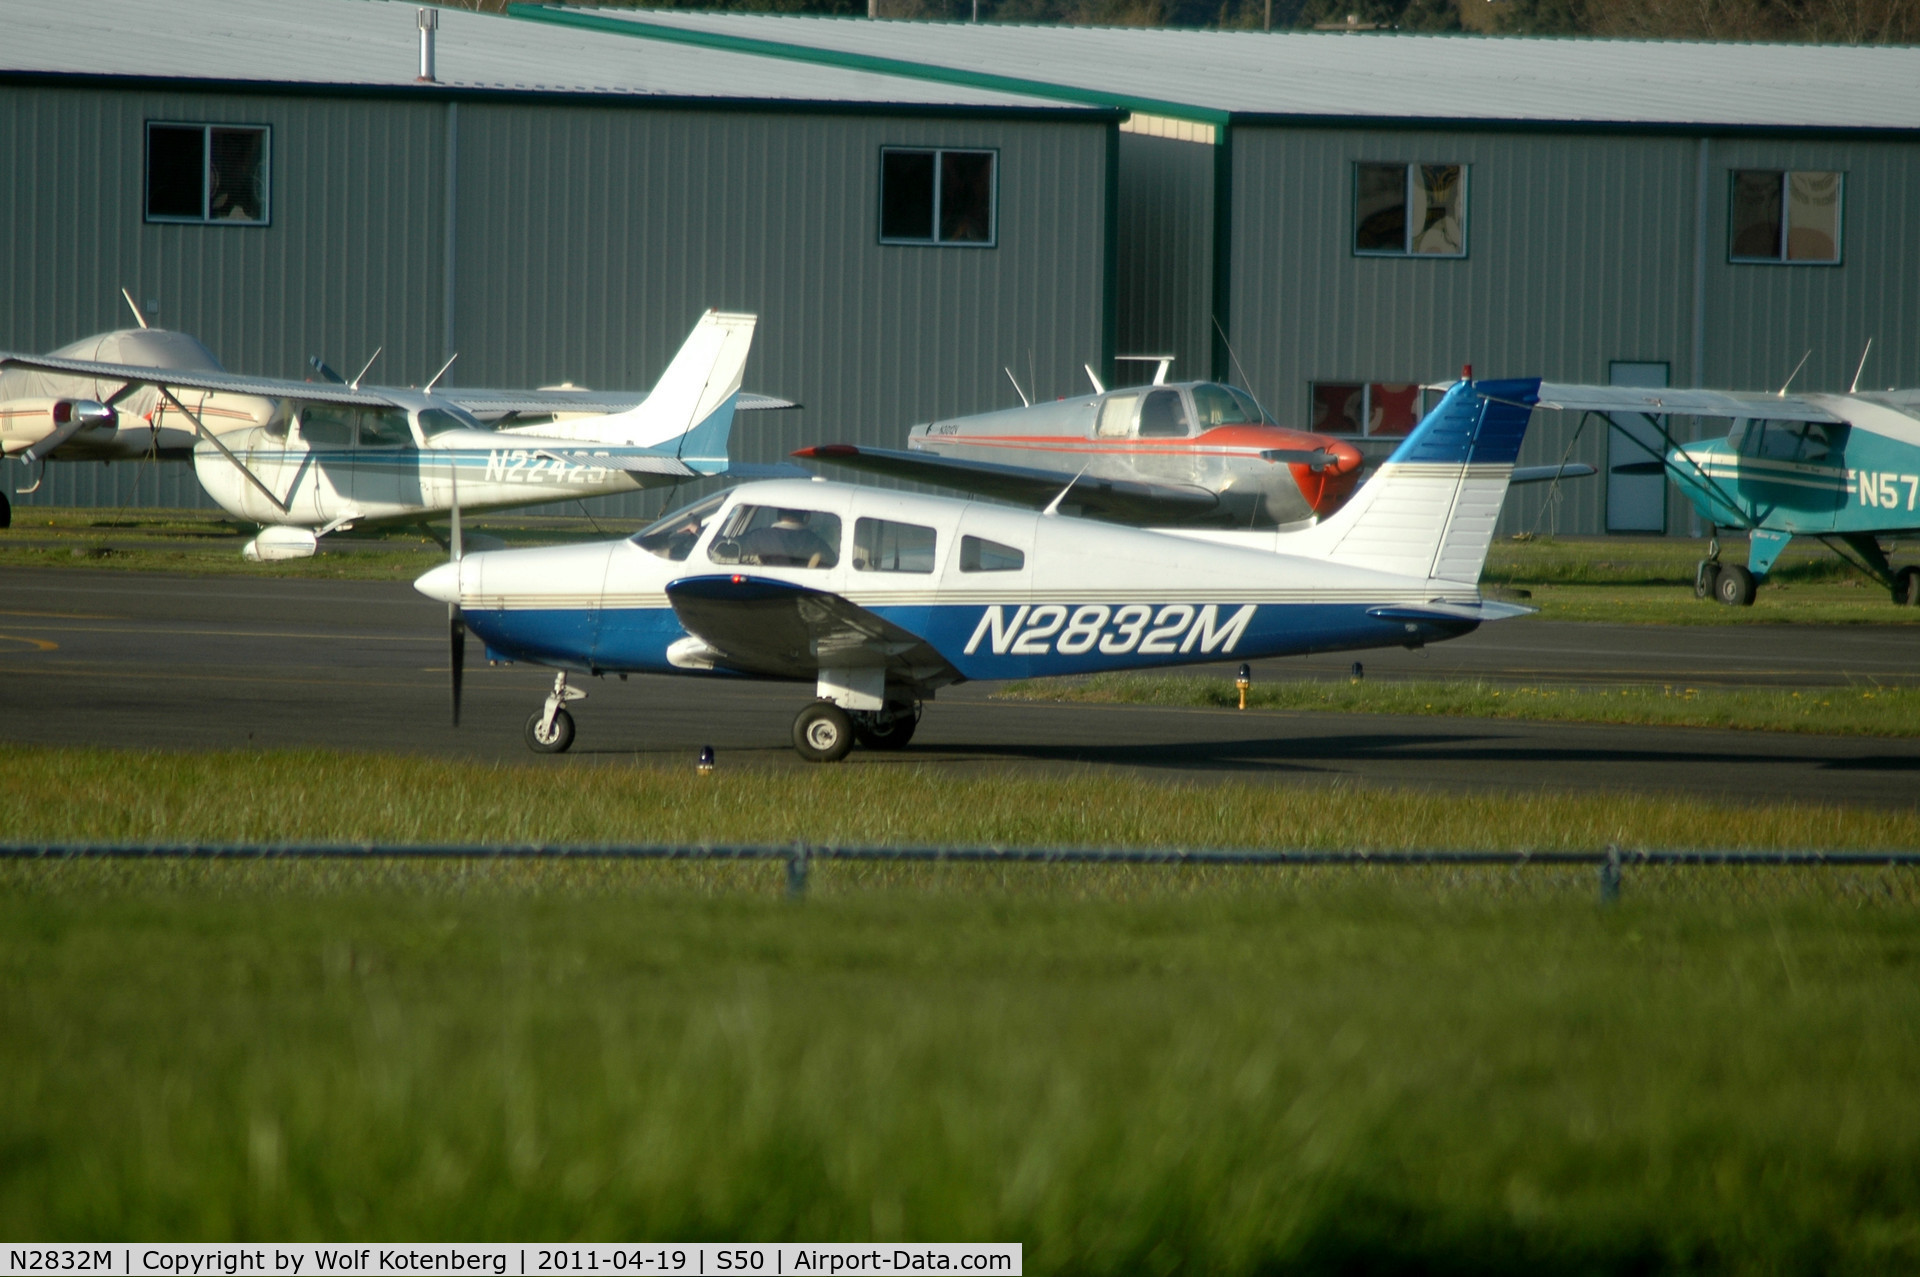 N2832M, 1977 Piper PA-28-161 C/N 28-7816316, rolling toward the active 34